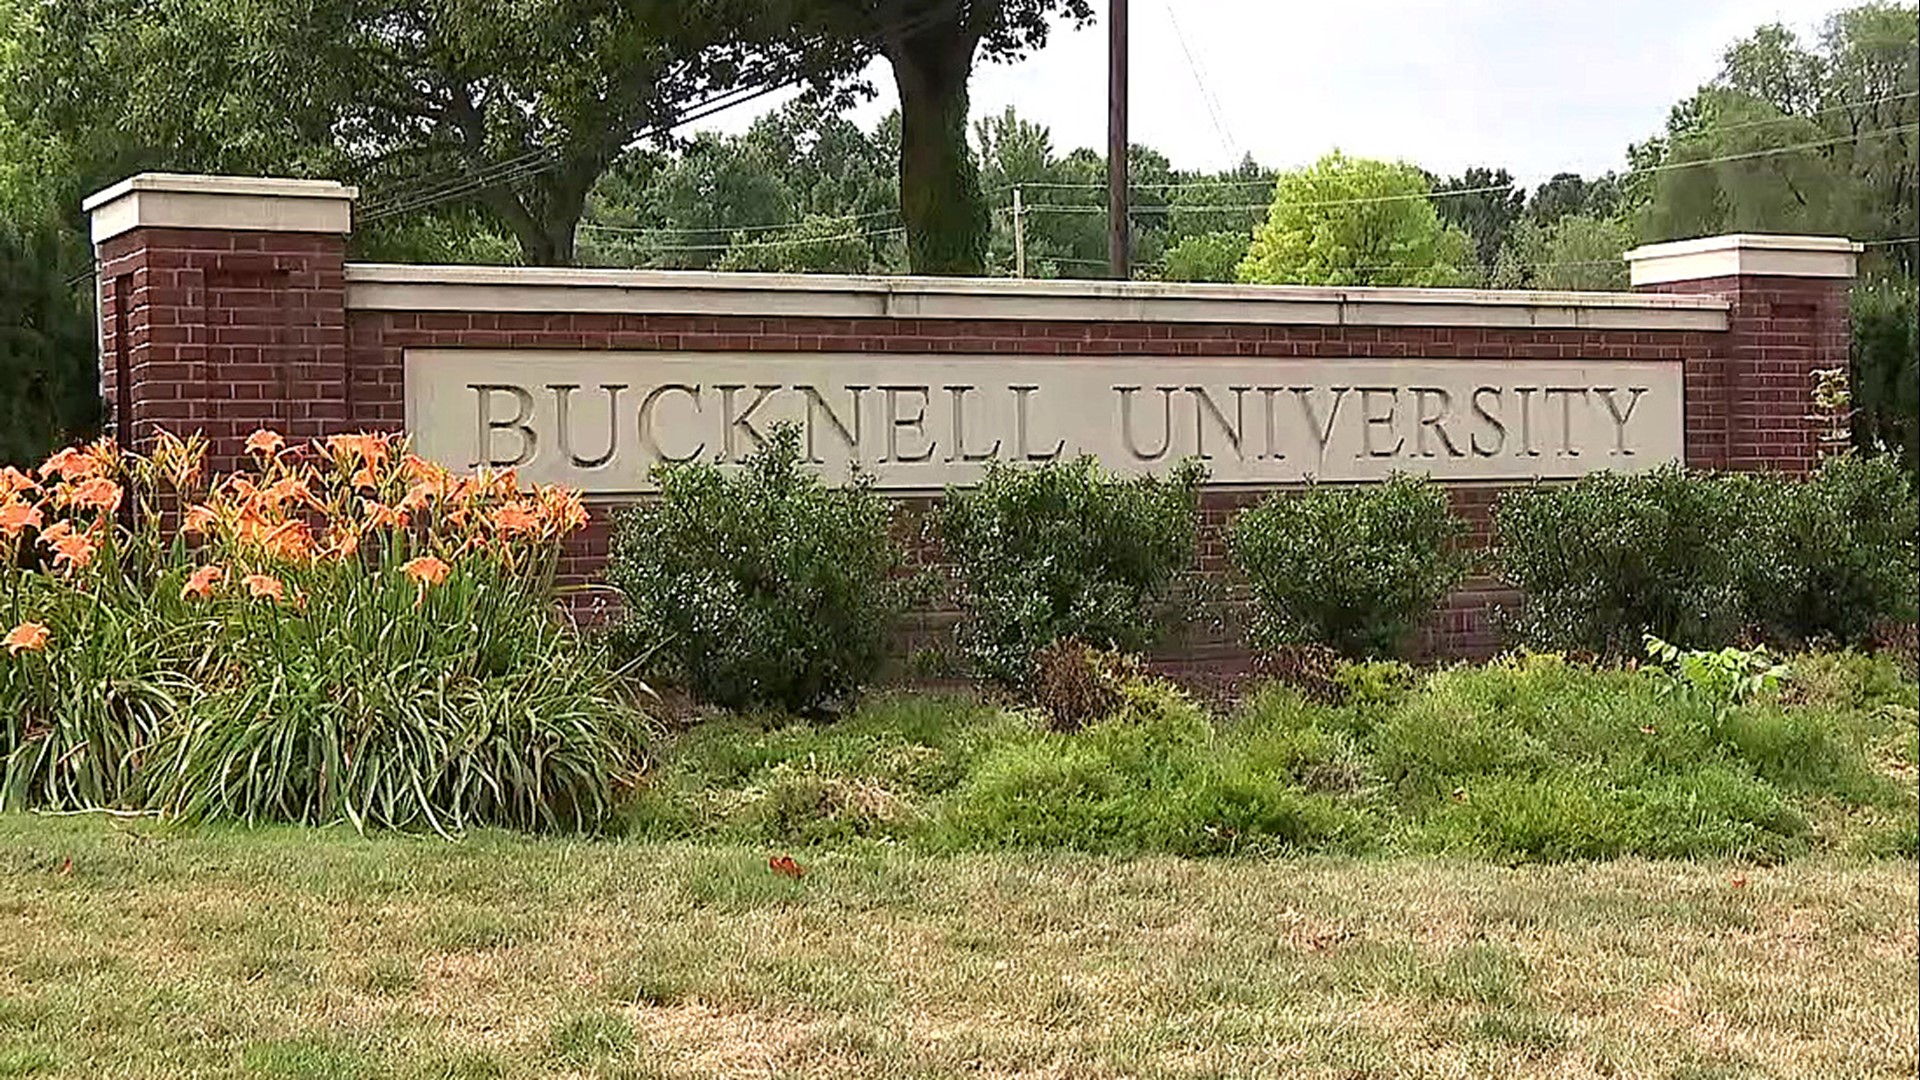 Students at Bucknell University will have to show they've been vaccinated against COVID-19 before returning in the fall.